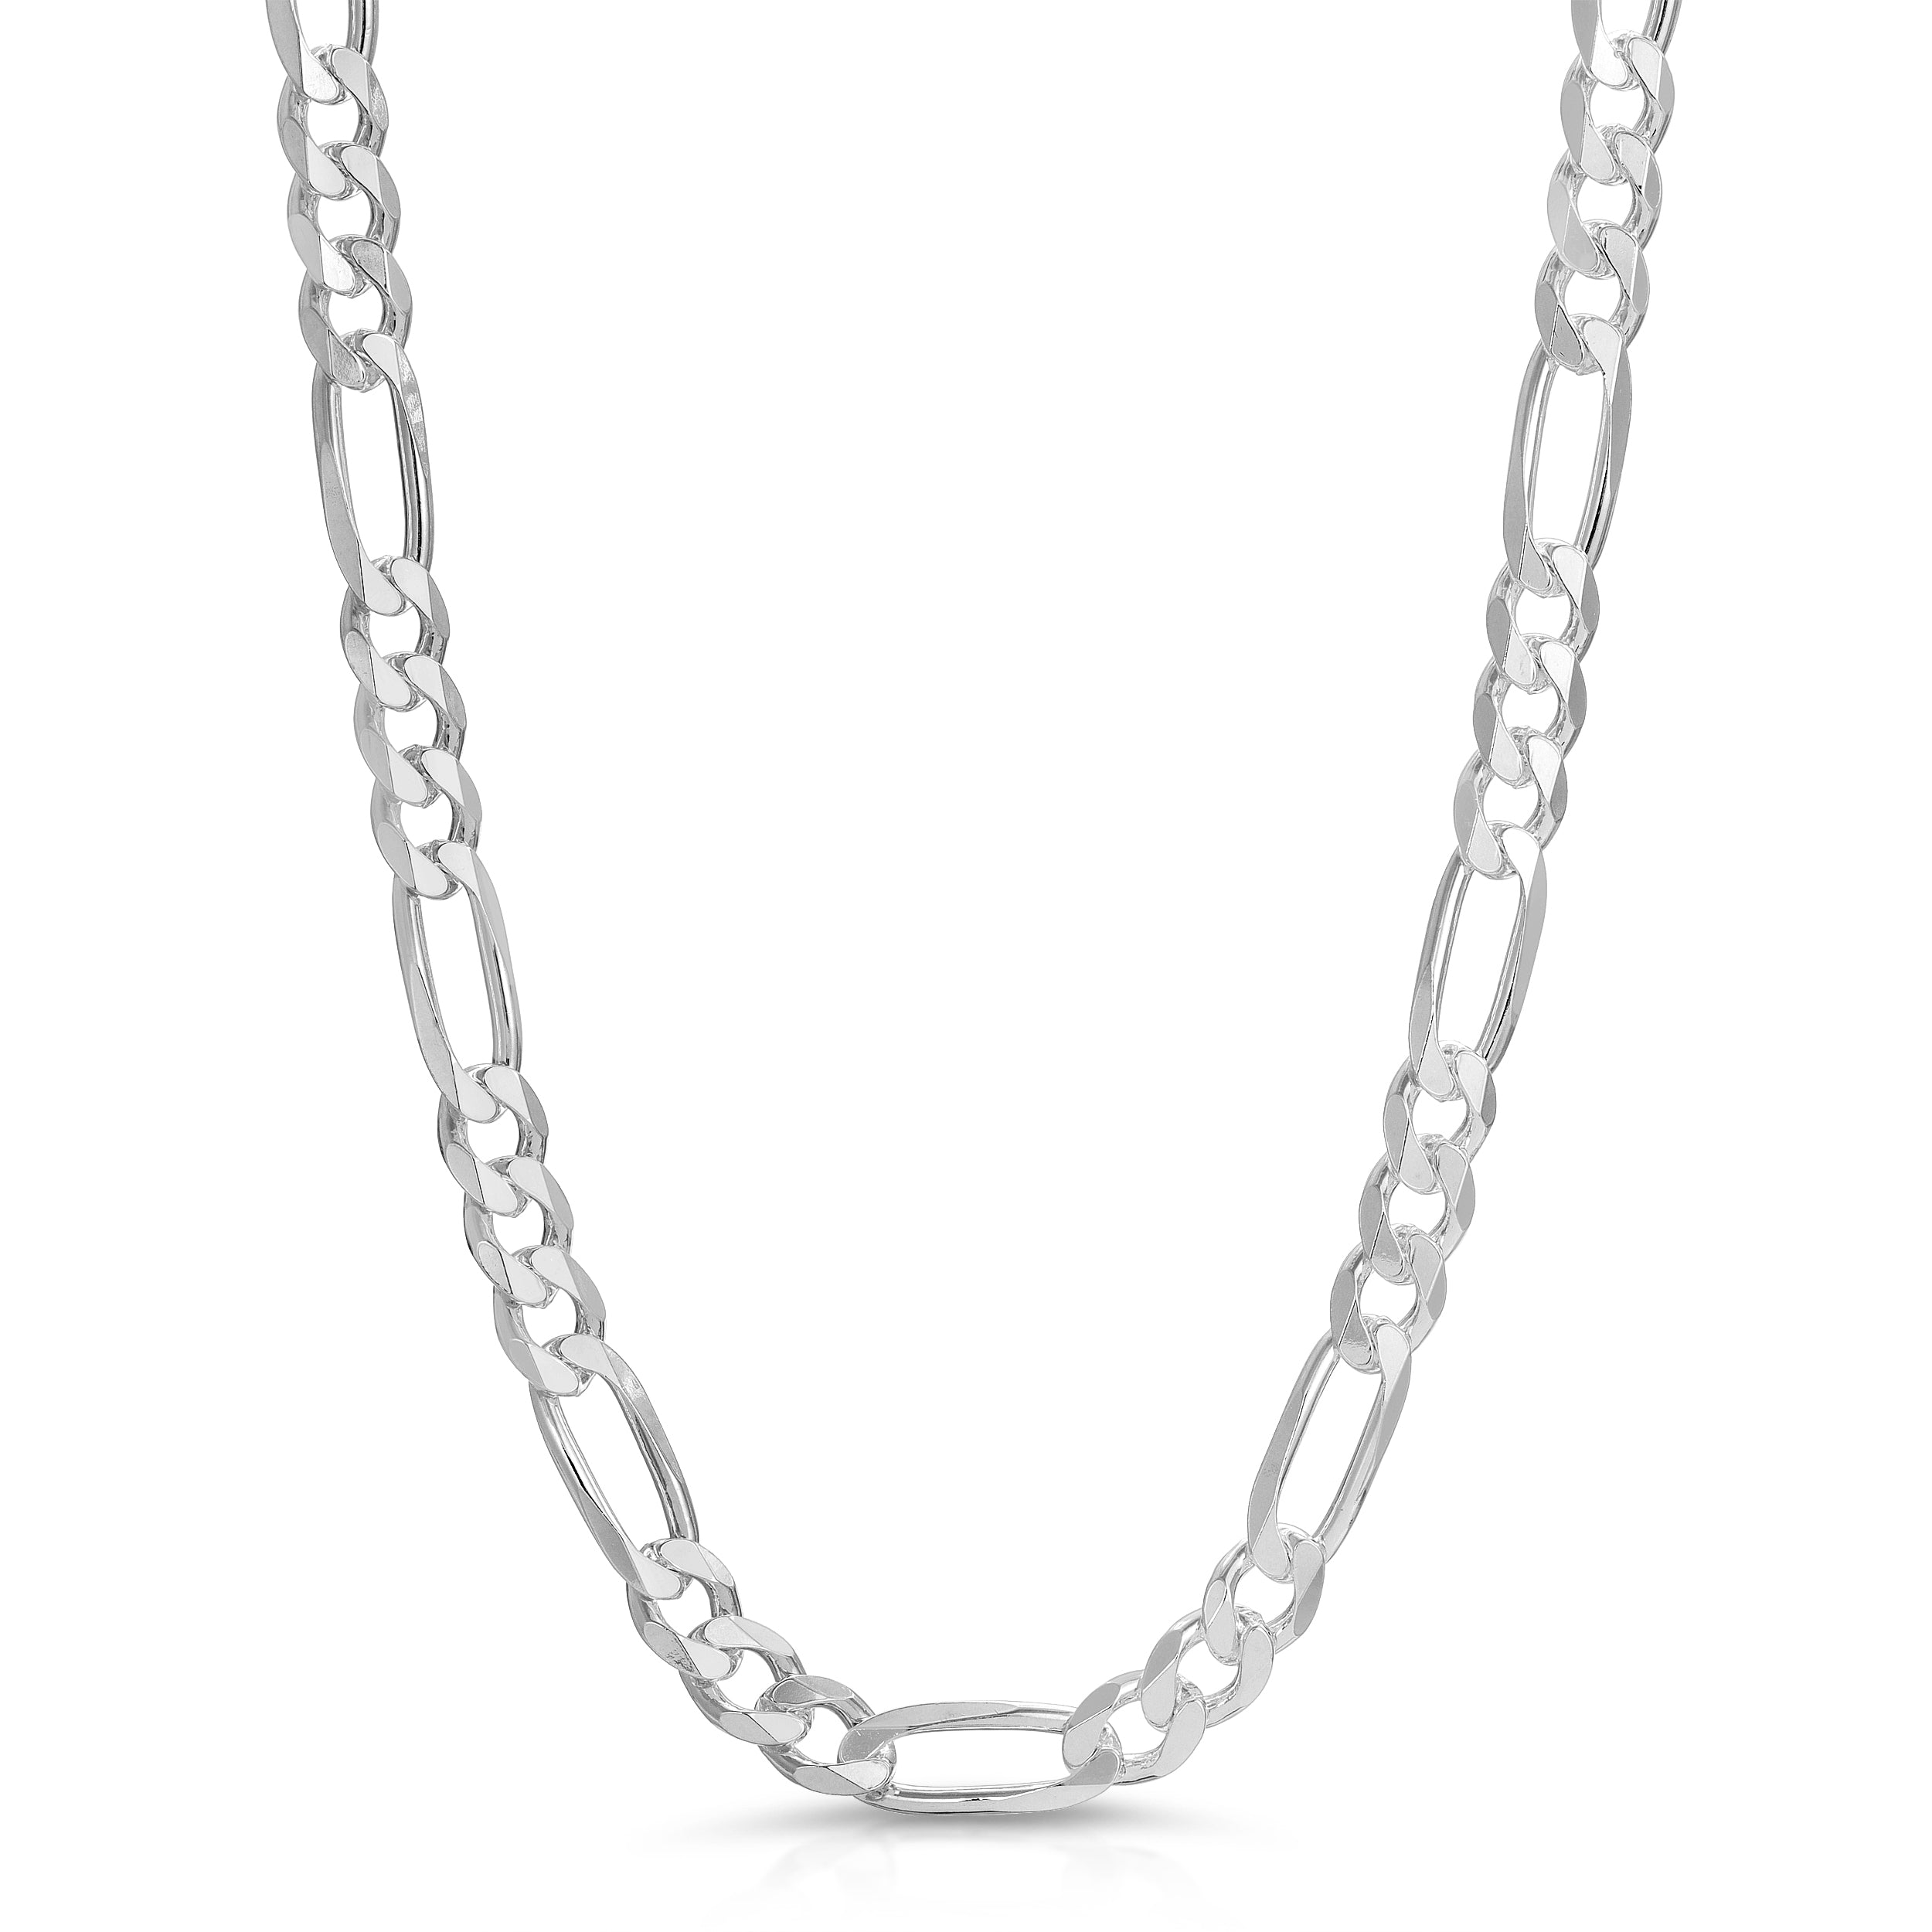 7.3mm Sterling silver 925 Figaro Chain 